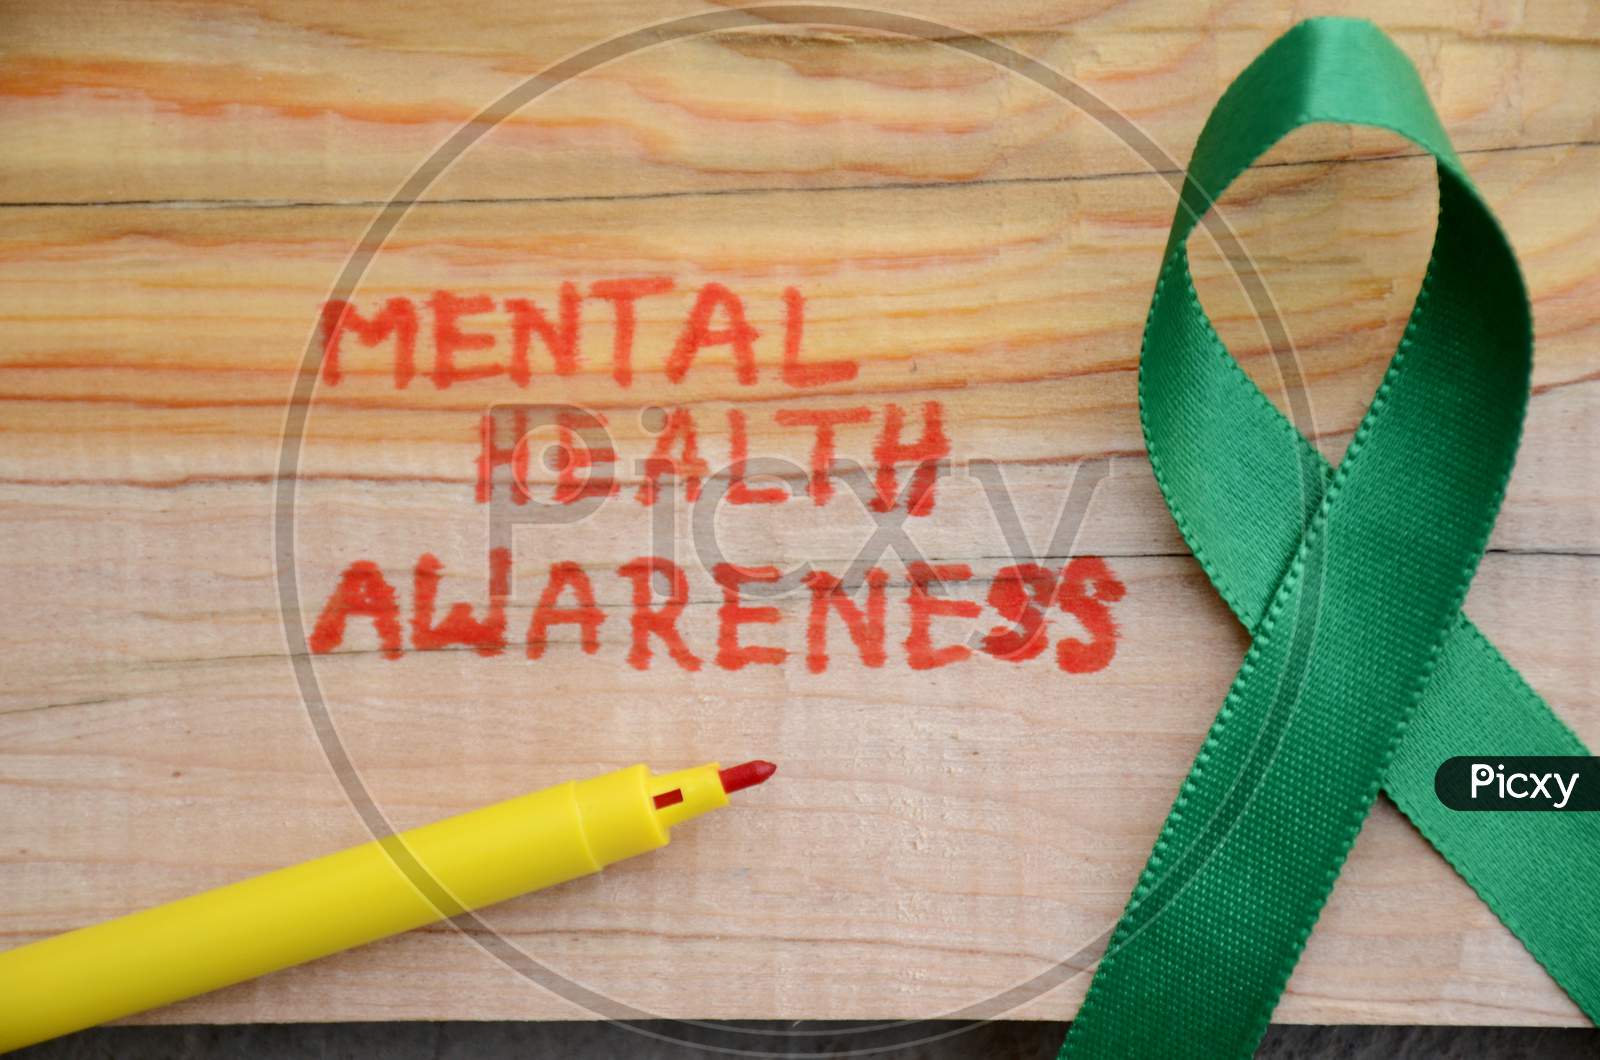 The Green Ribbon Cross With Red Writing Mental Health Awareness Concept On The Wooden Background.